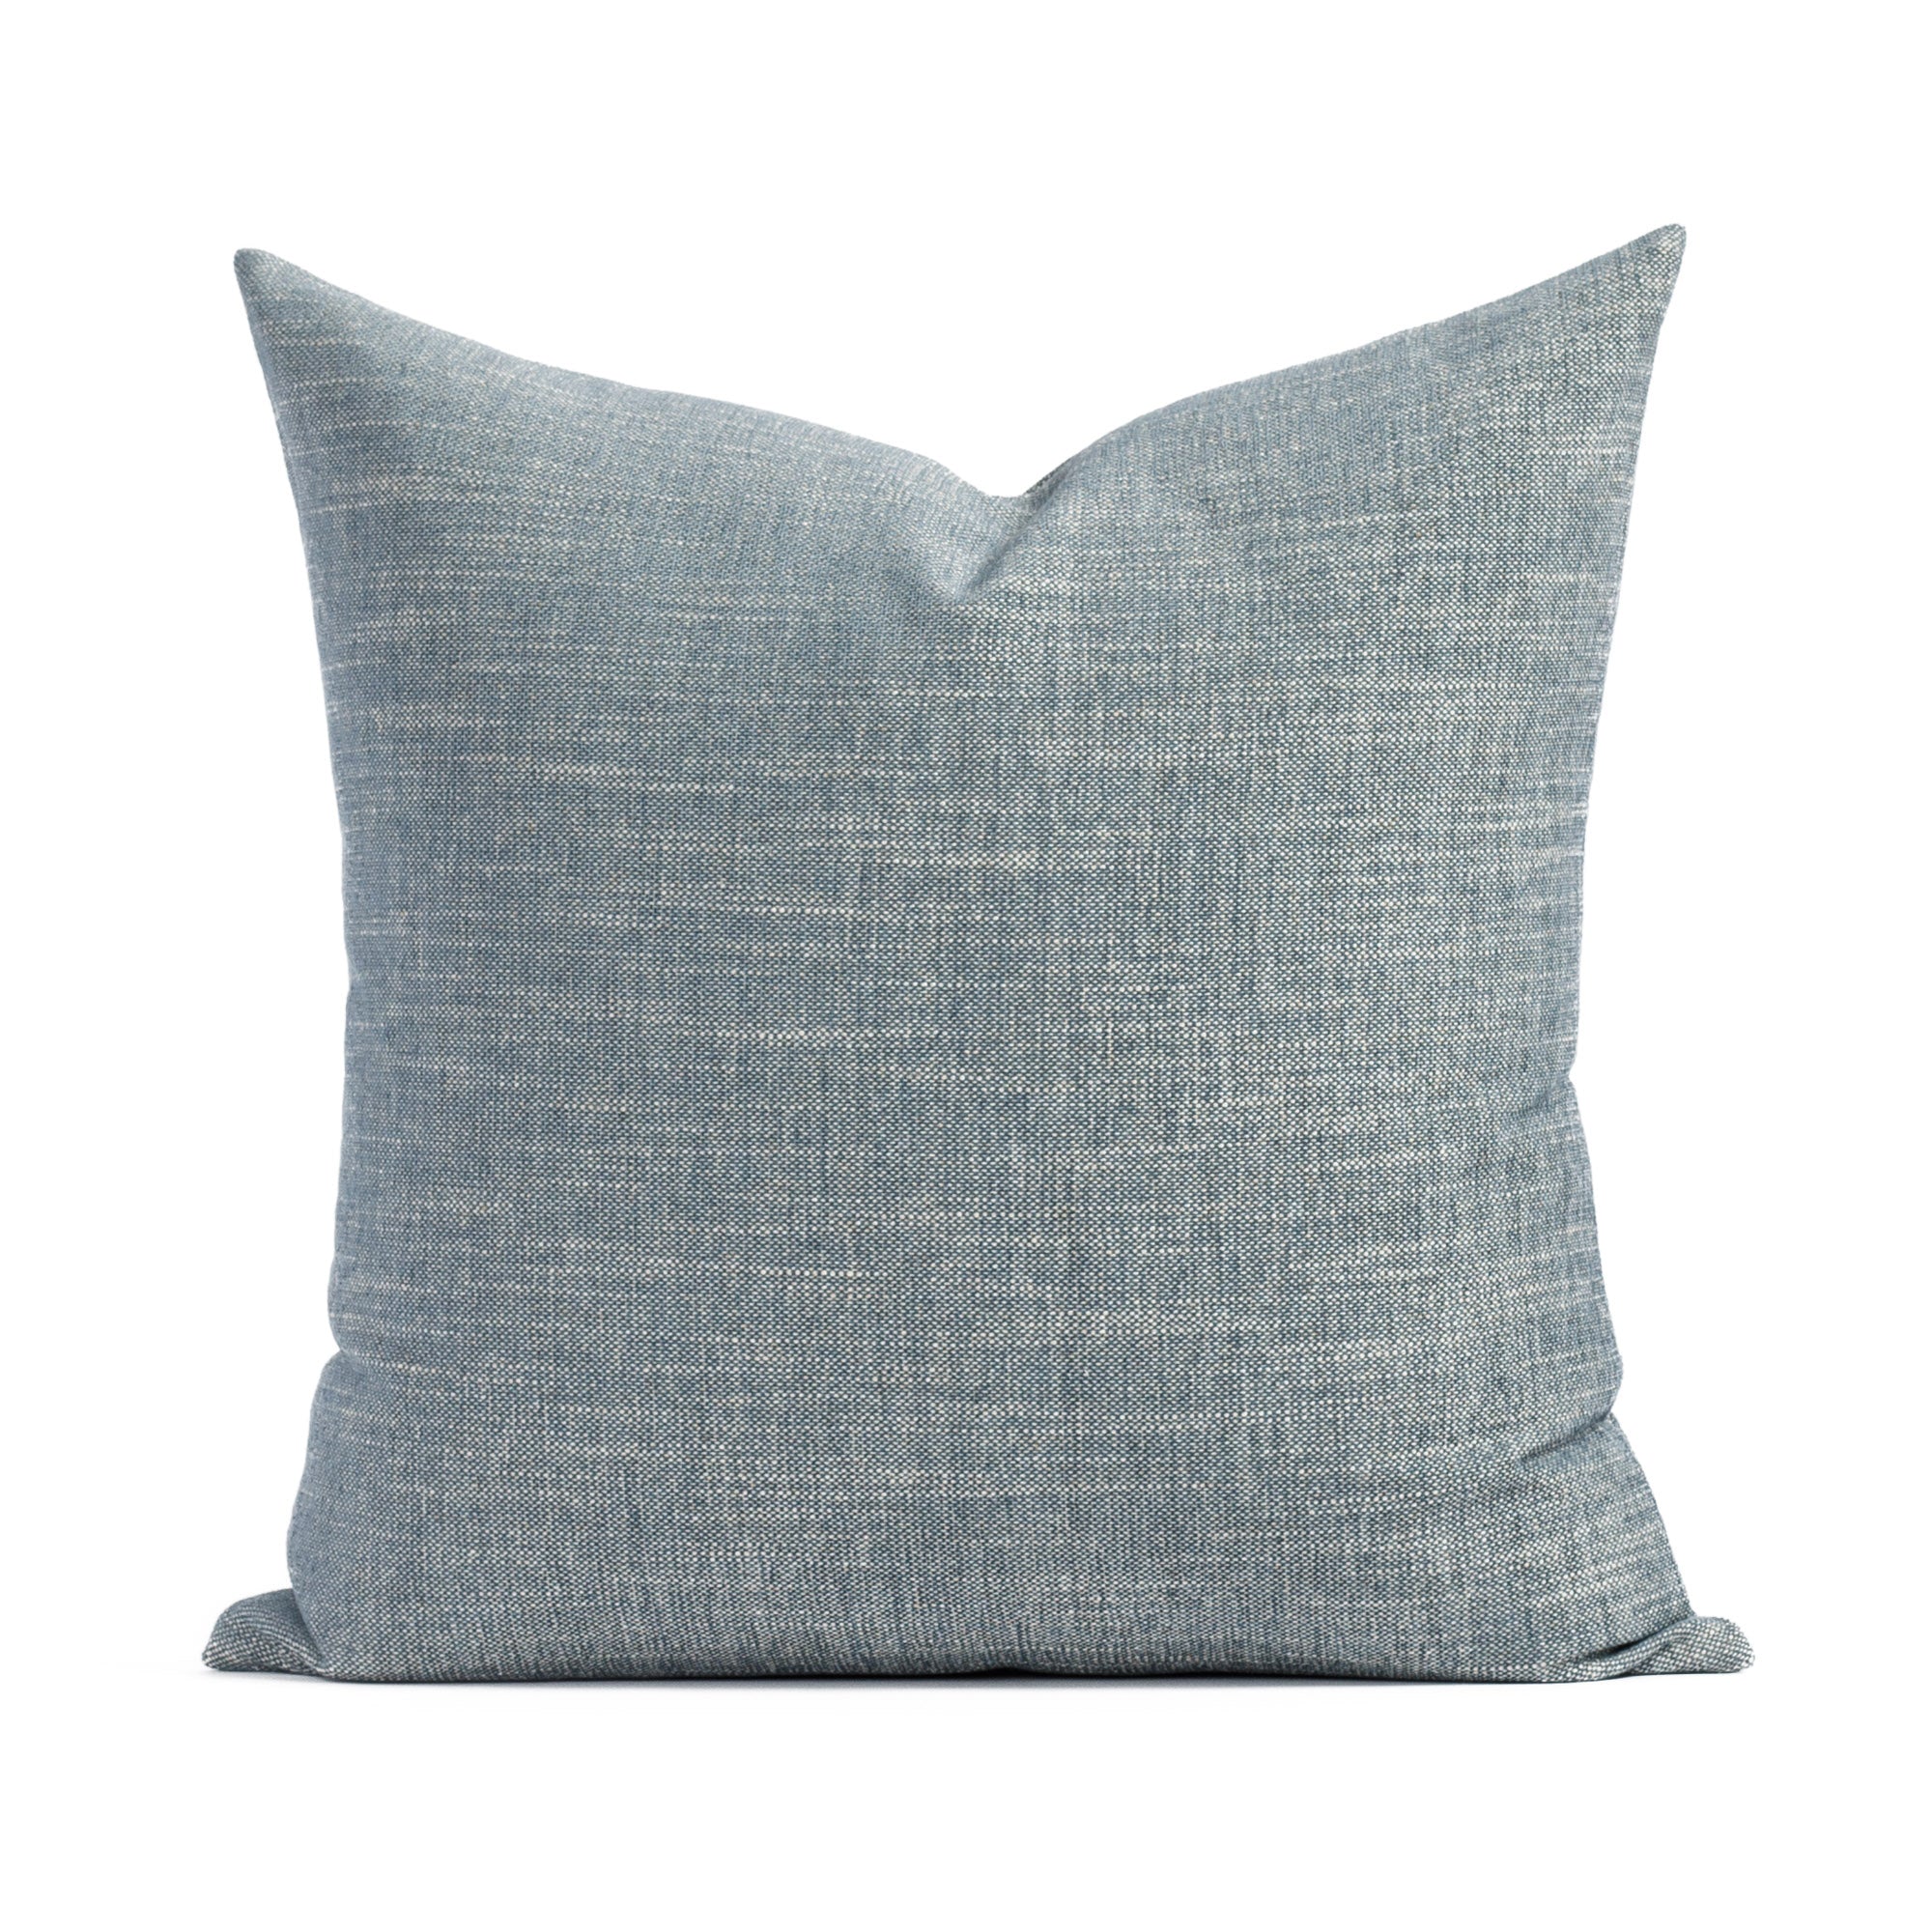 Perry 22x22 Pillow Chambray, a soft stone blue throw pillow from Tonic Living